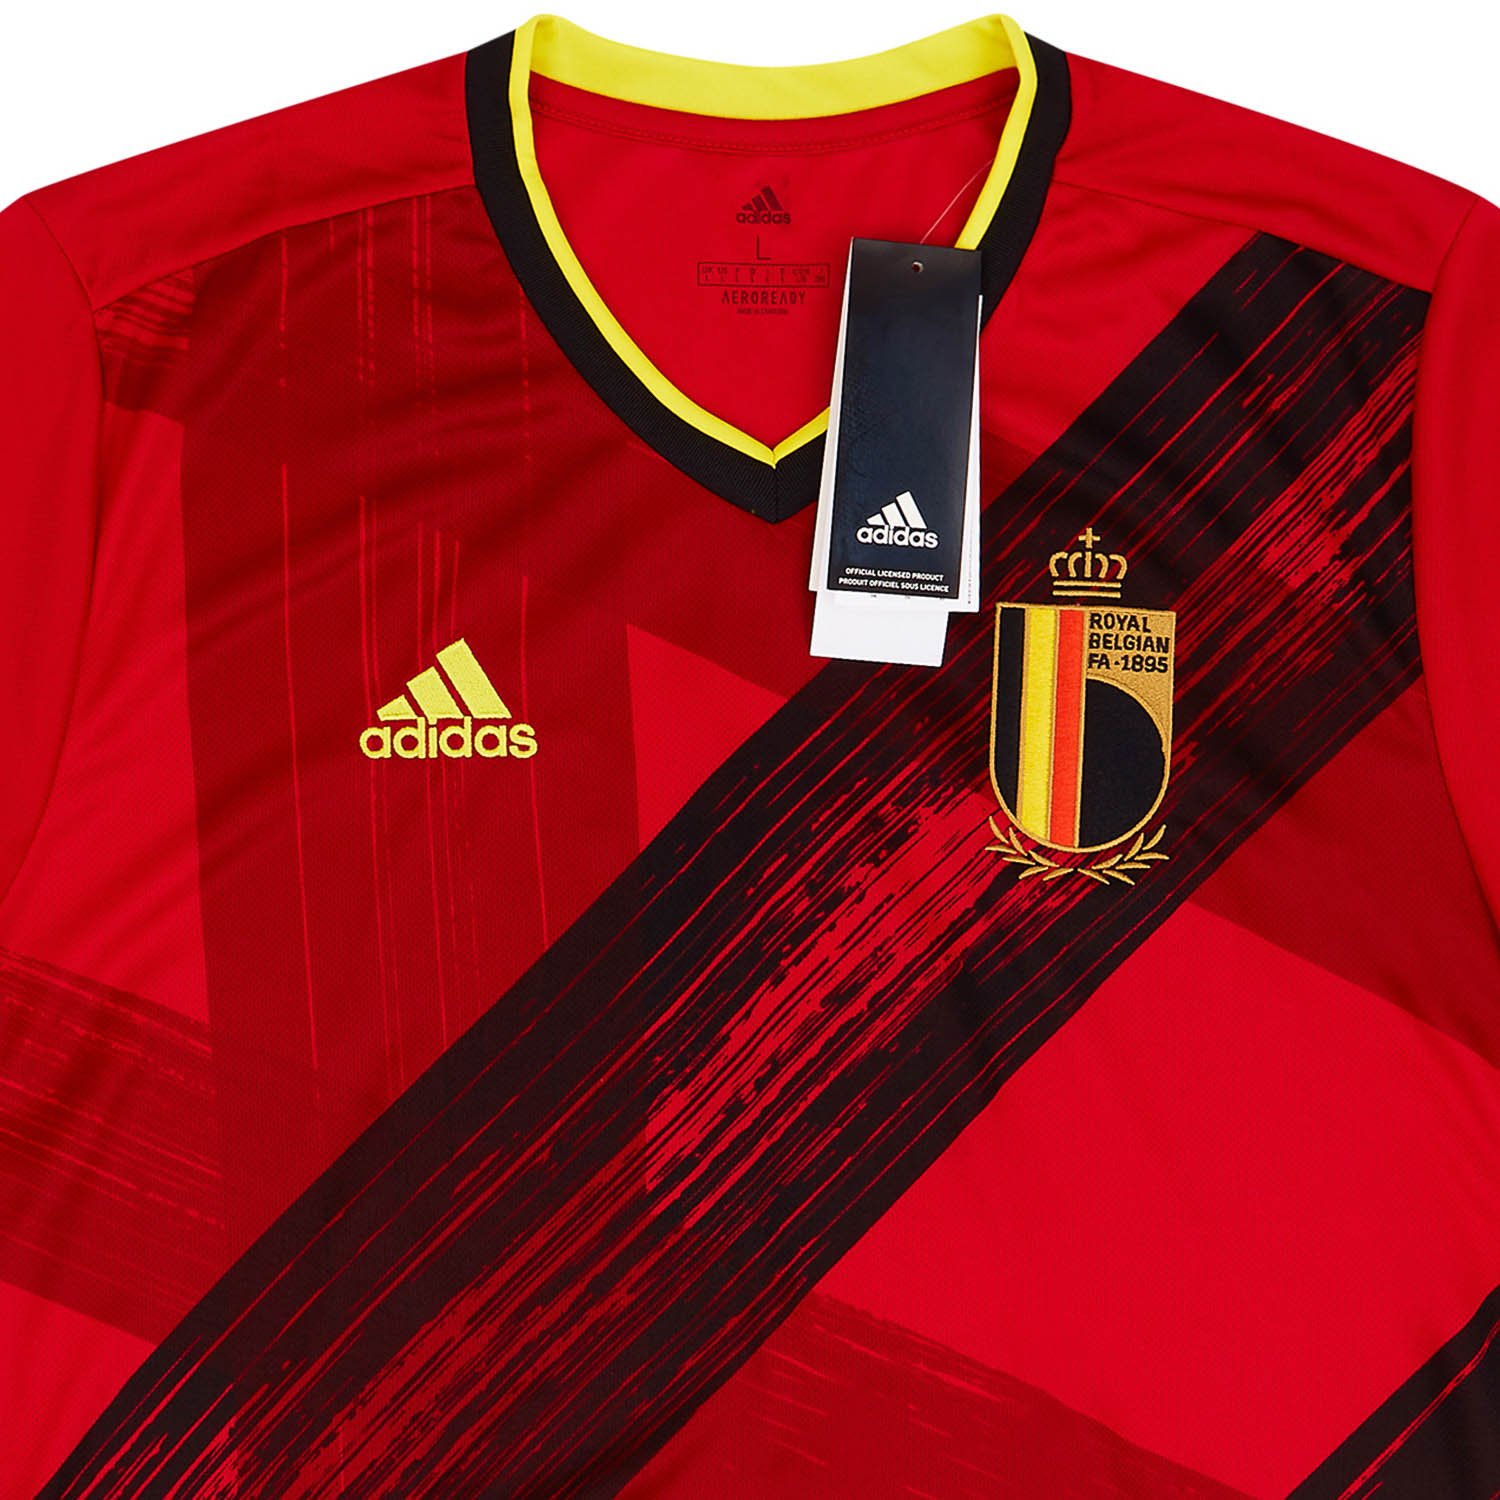 Officially Licensed Belgium National Team Jerseys, Belgium National Team  Soccer Gear, Kits & Apparel Store